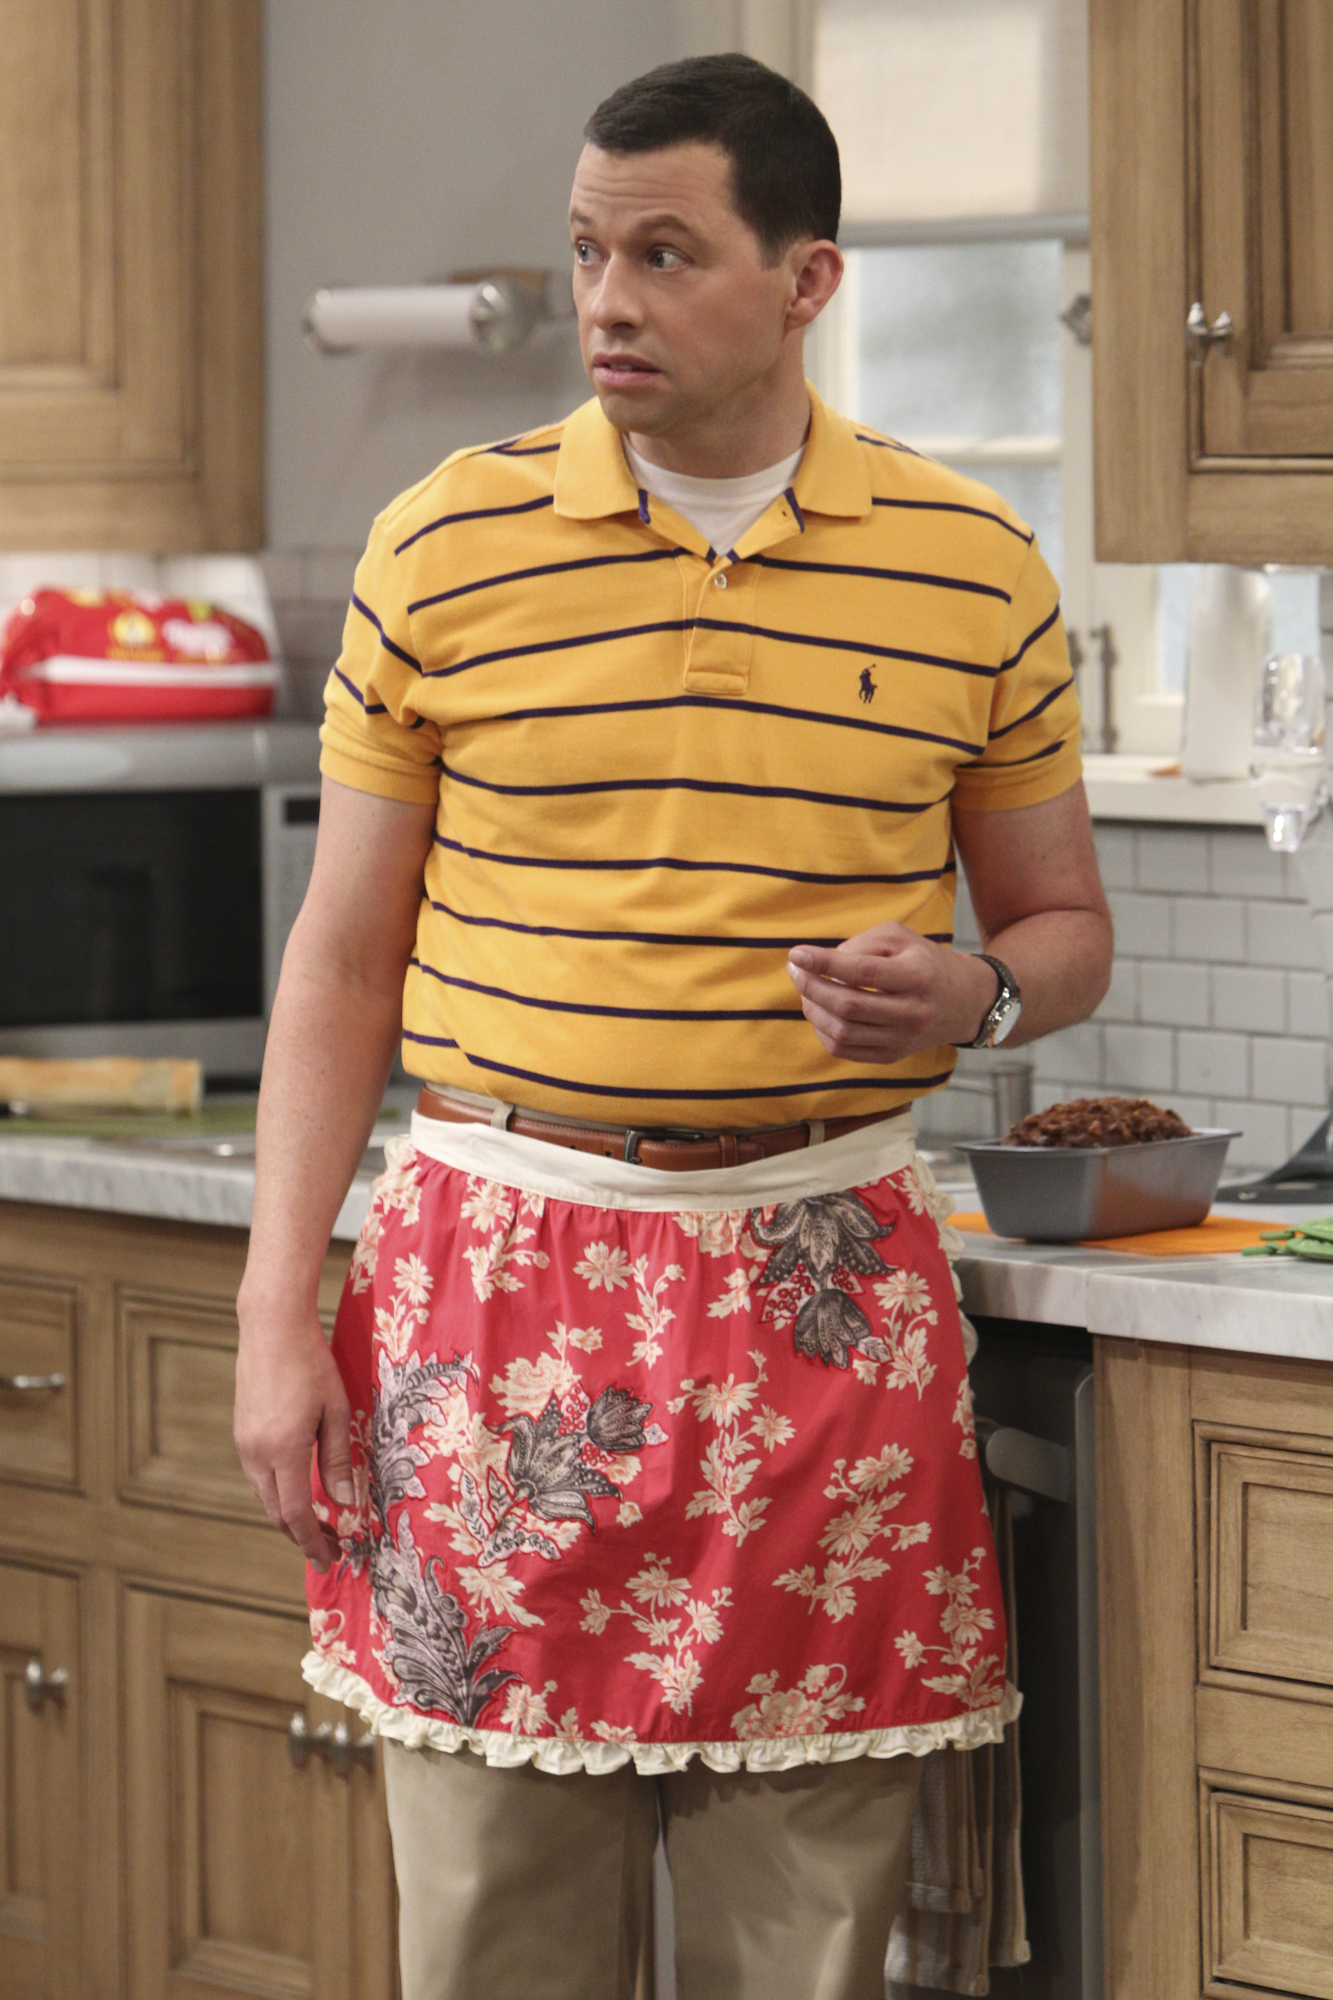 Jon Cryer as Alan Harper in "Two And A Half Men" in 2014 | Source: Getty Images